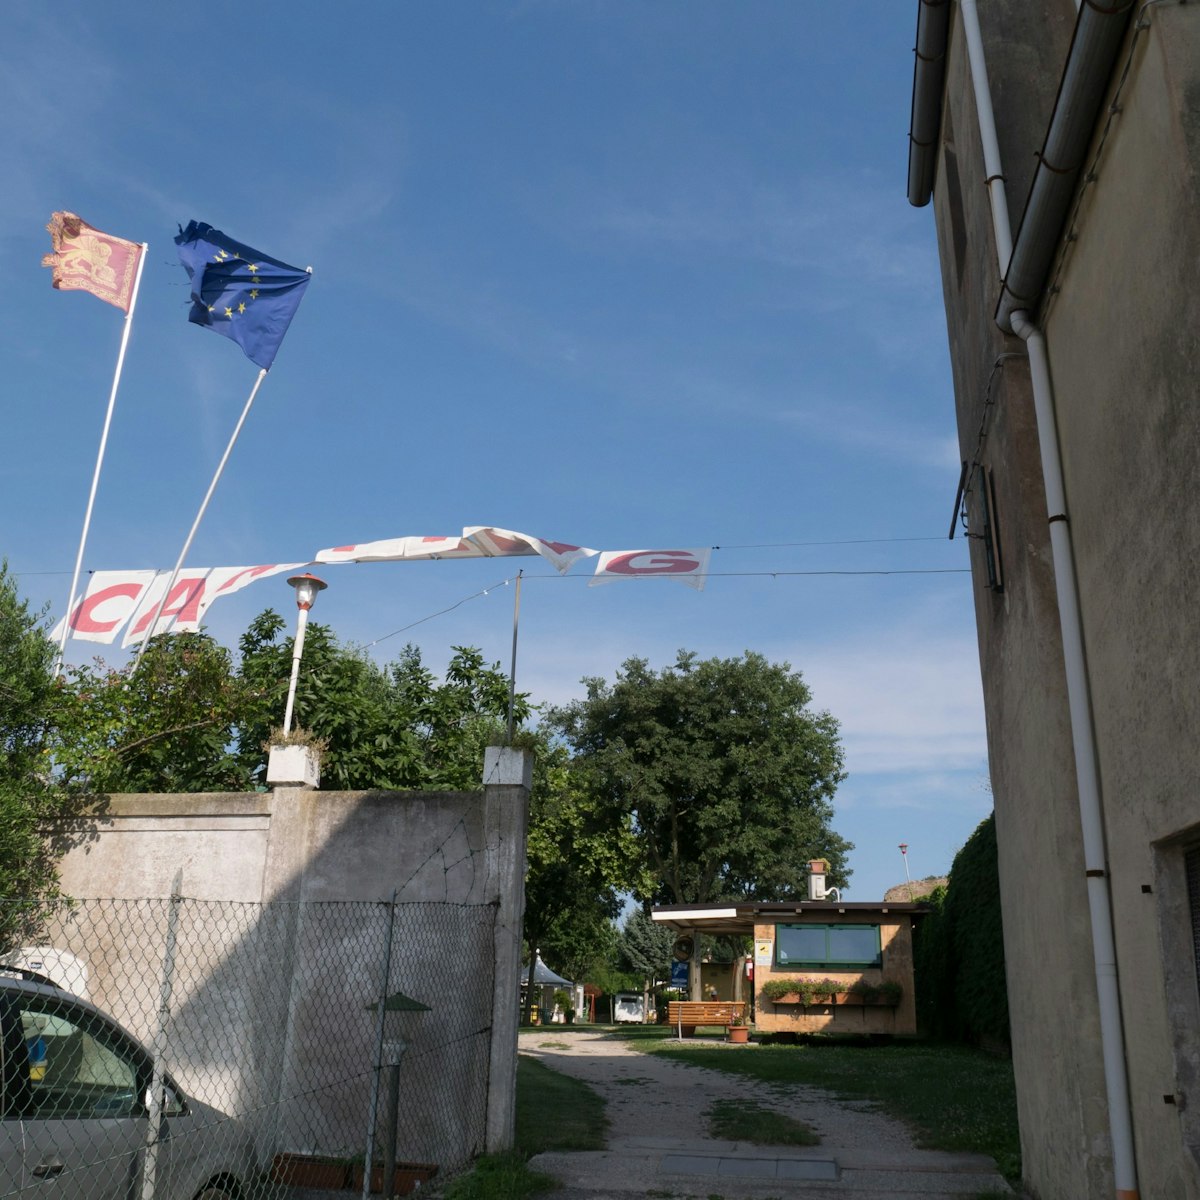 Bunting and flags signpost the entrance to the Camping San Nicolò campsite